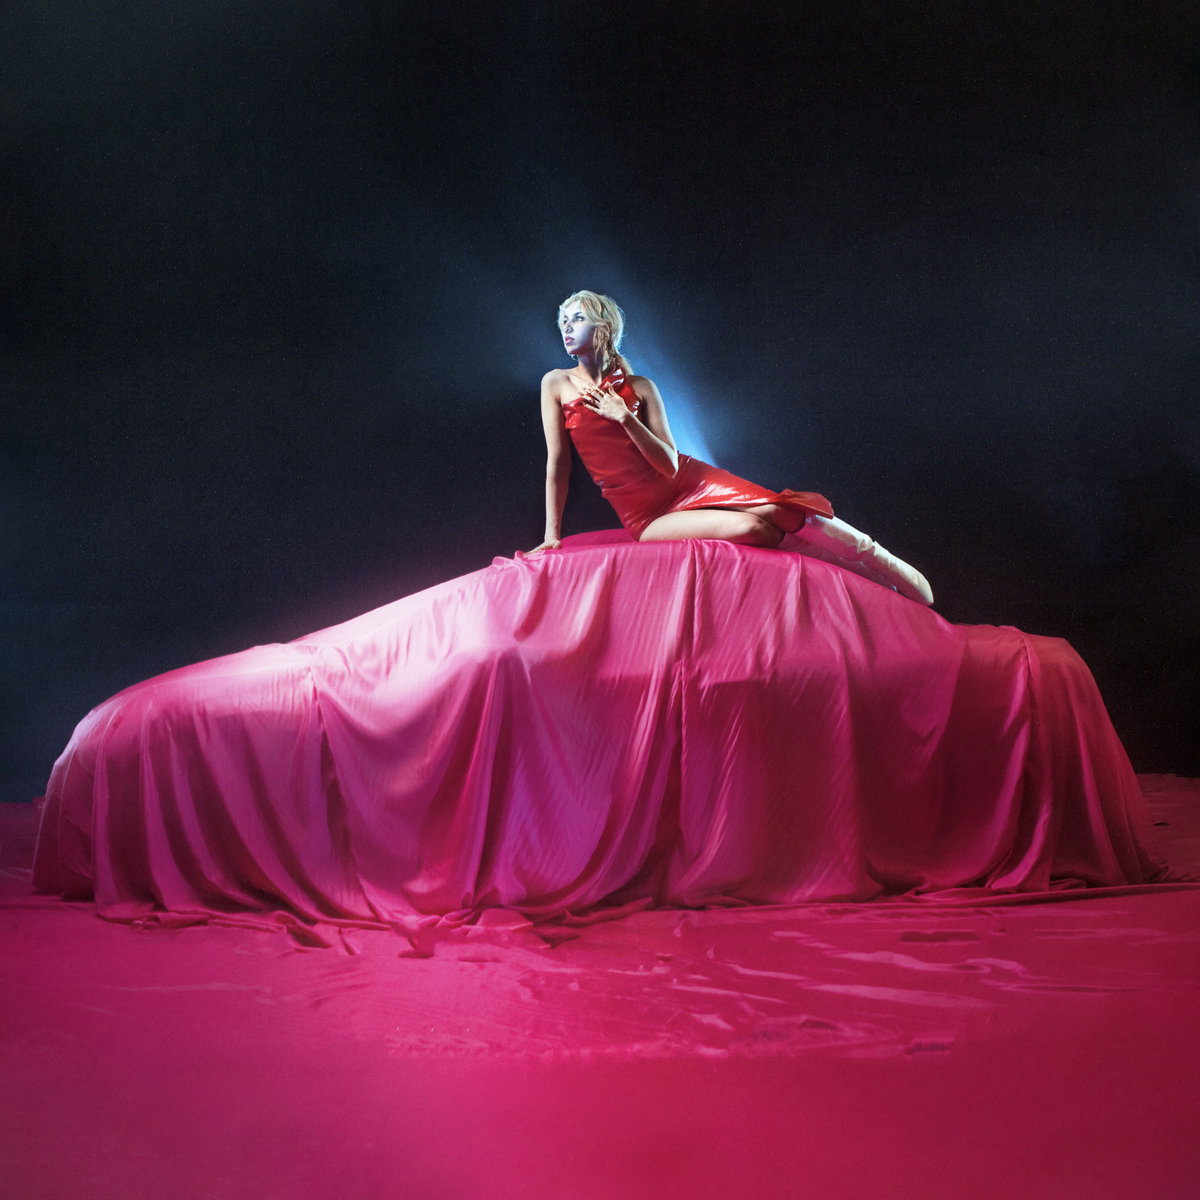 Cover art for Circulus Vitiosus by VTSS. Person elegantly sat atop a car covered in a pink sheet.